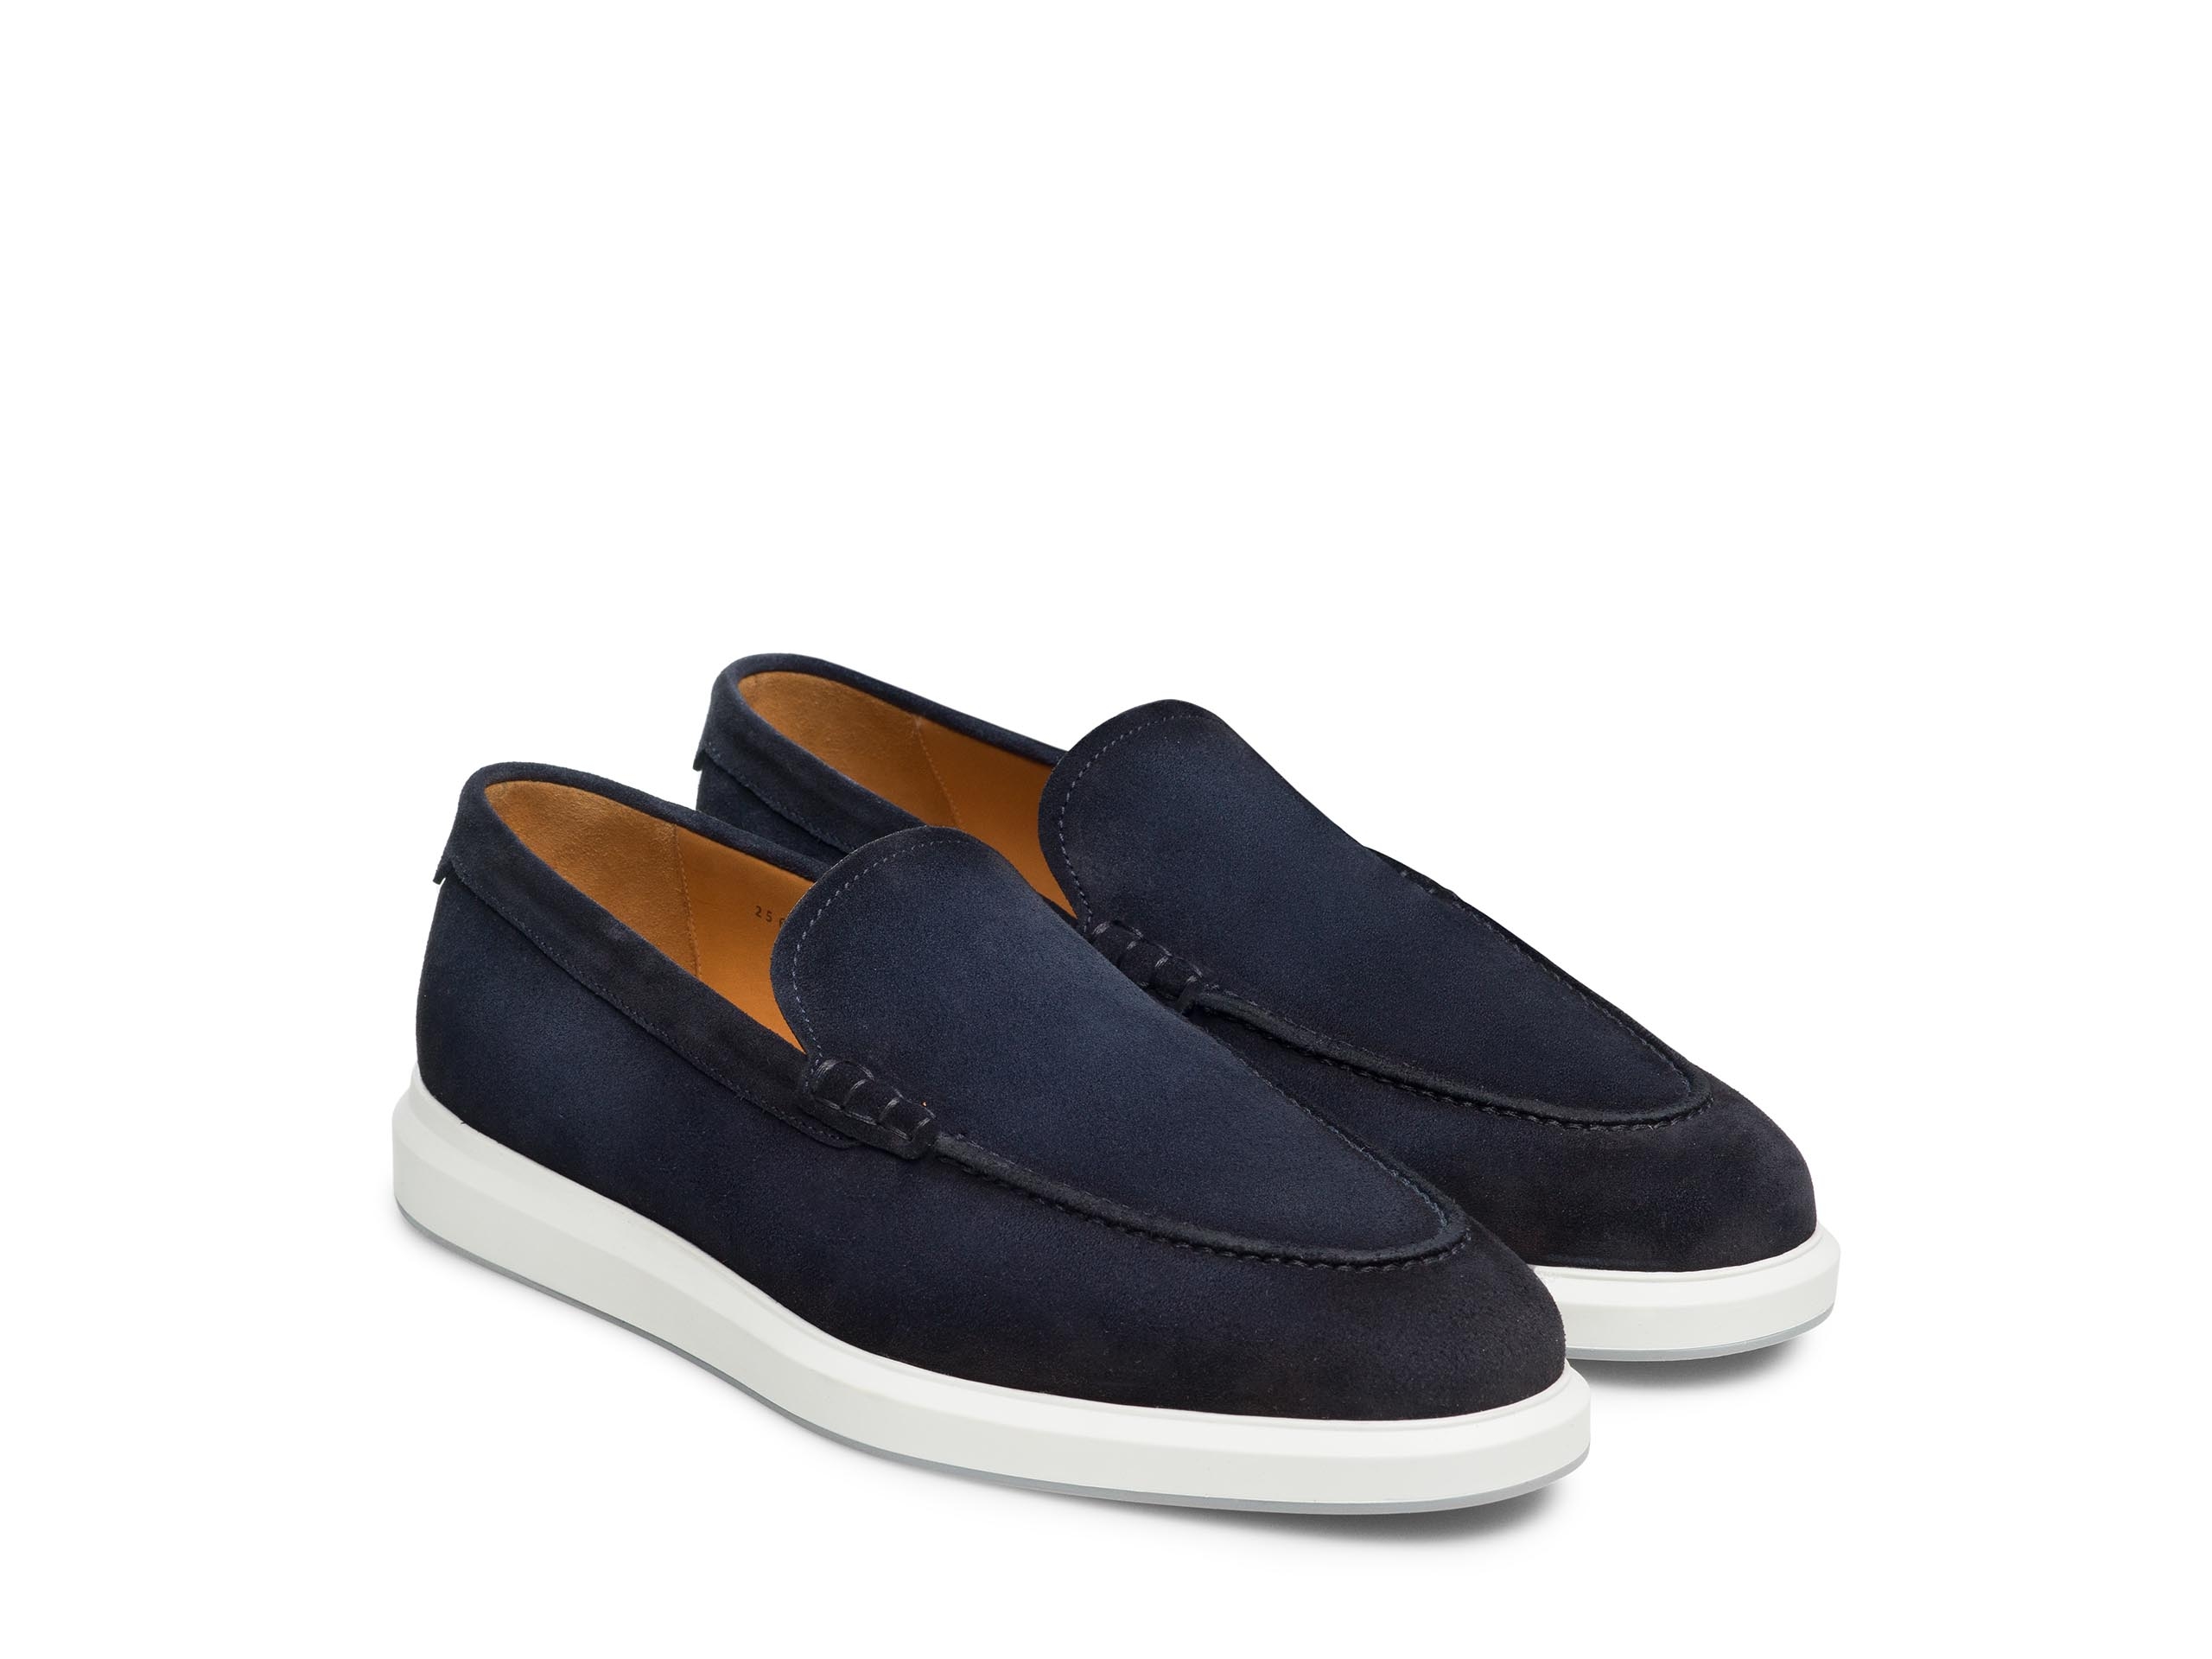 Pair of the Orion Navy Suede